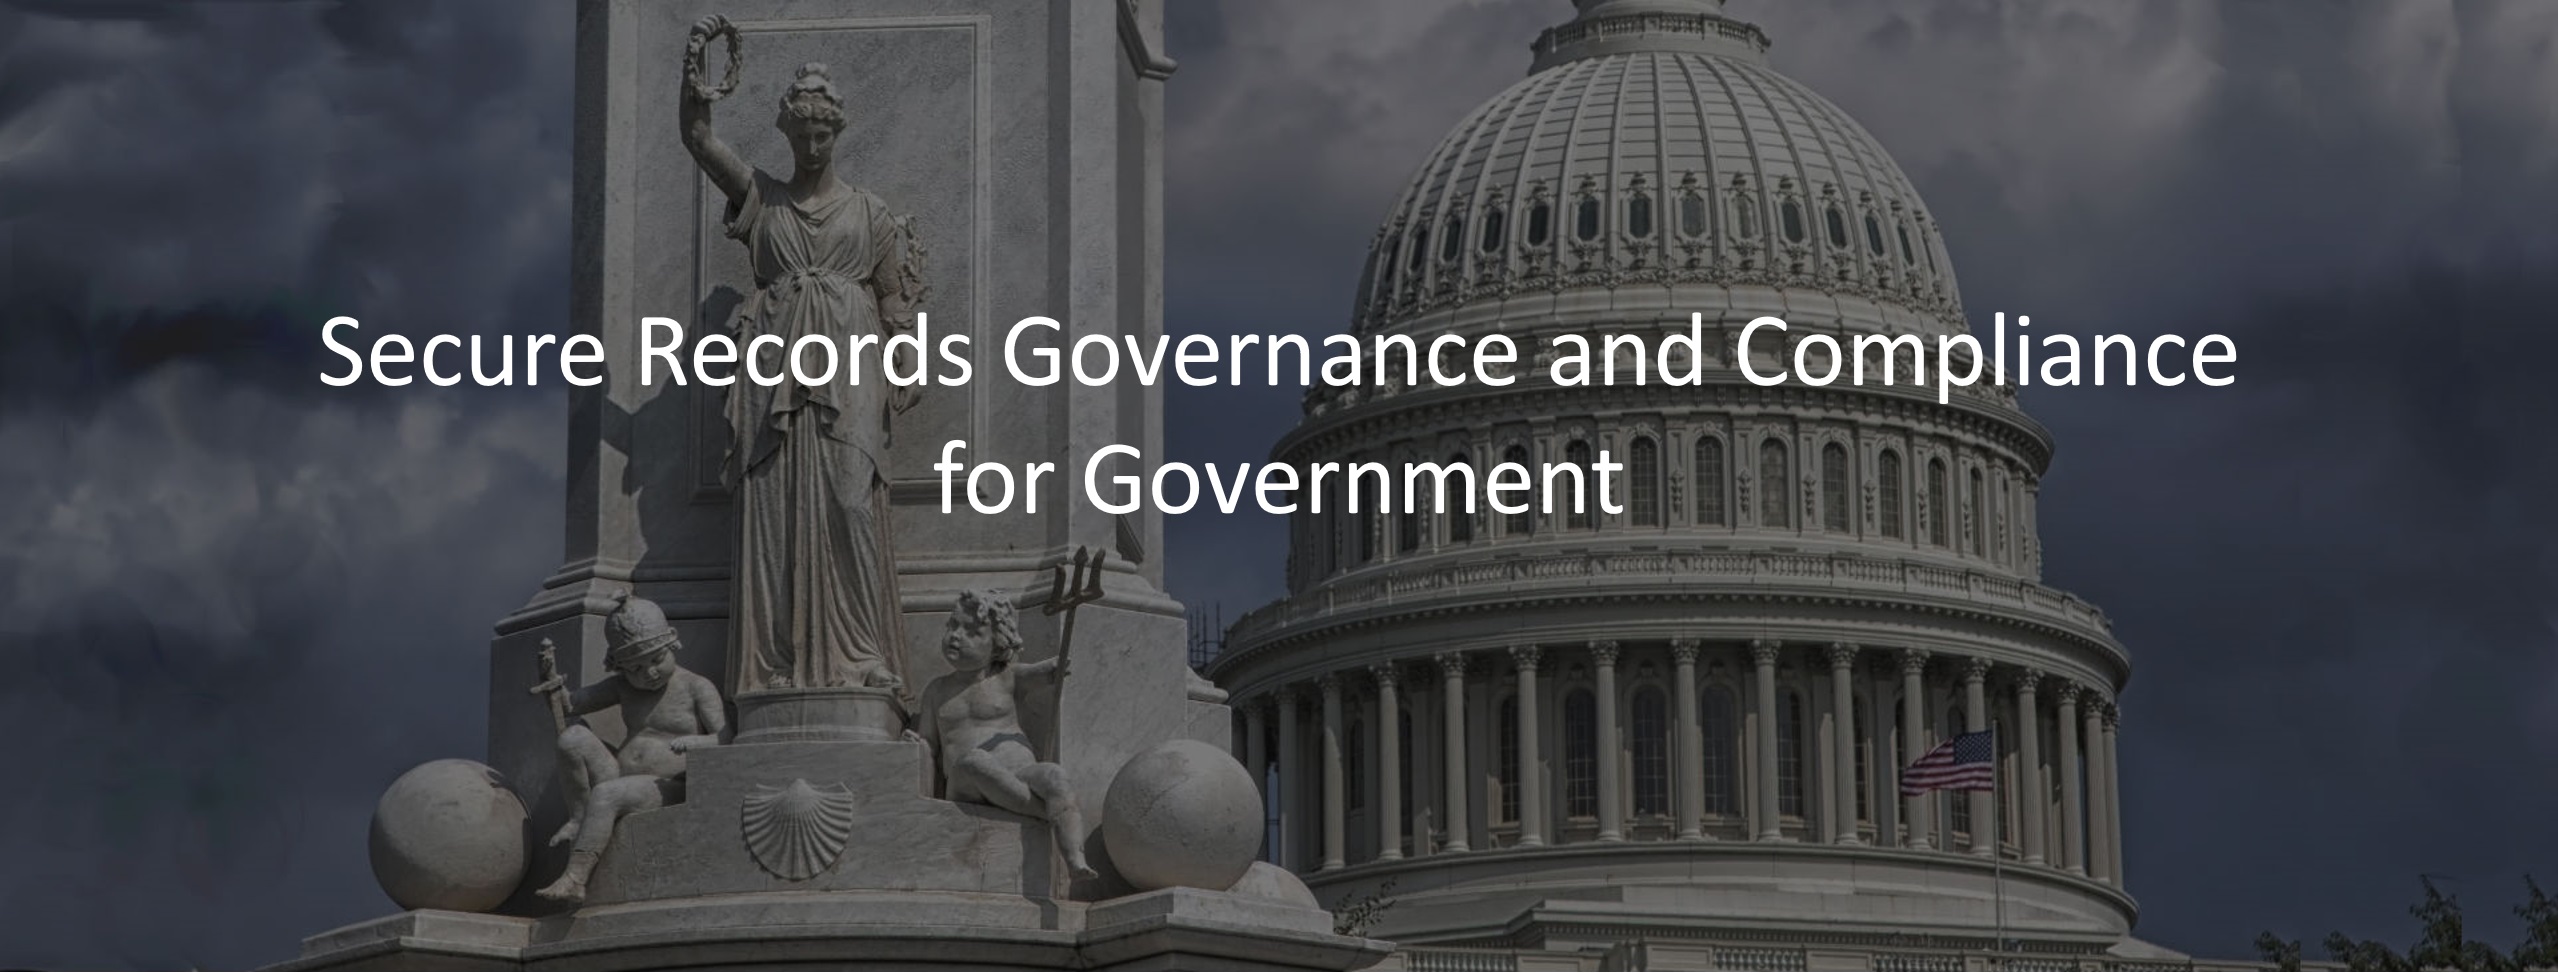 Secure Records Governance and Compliance for Government